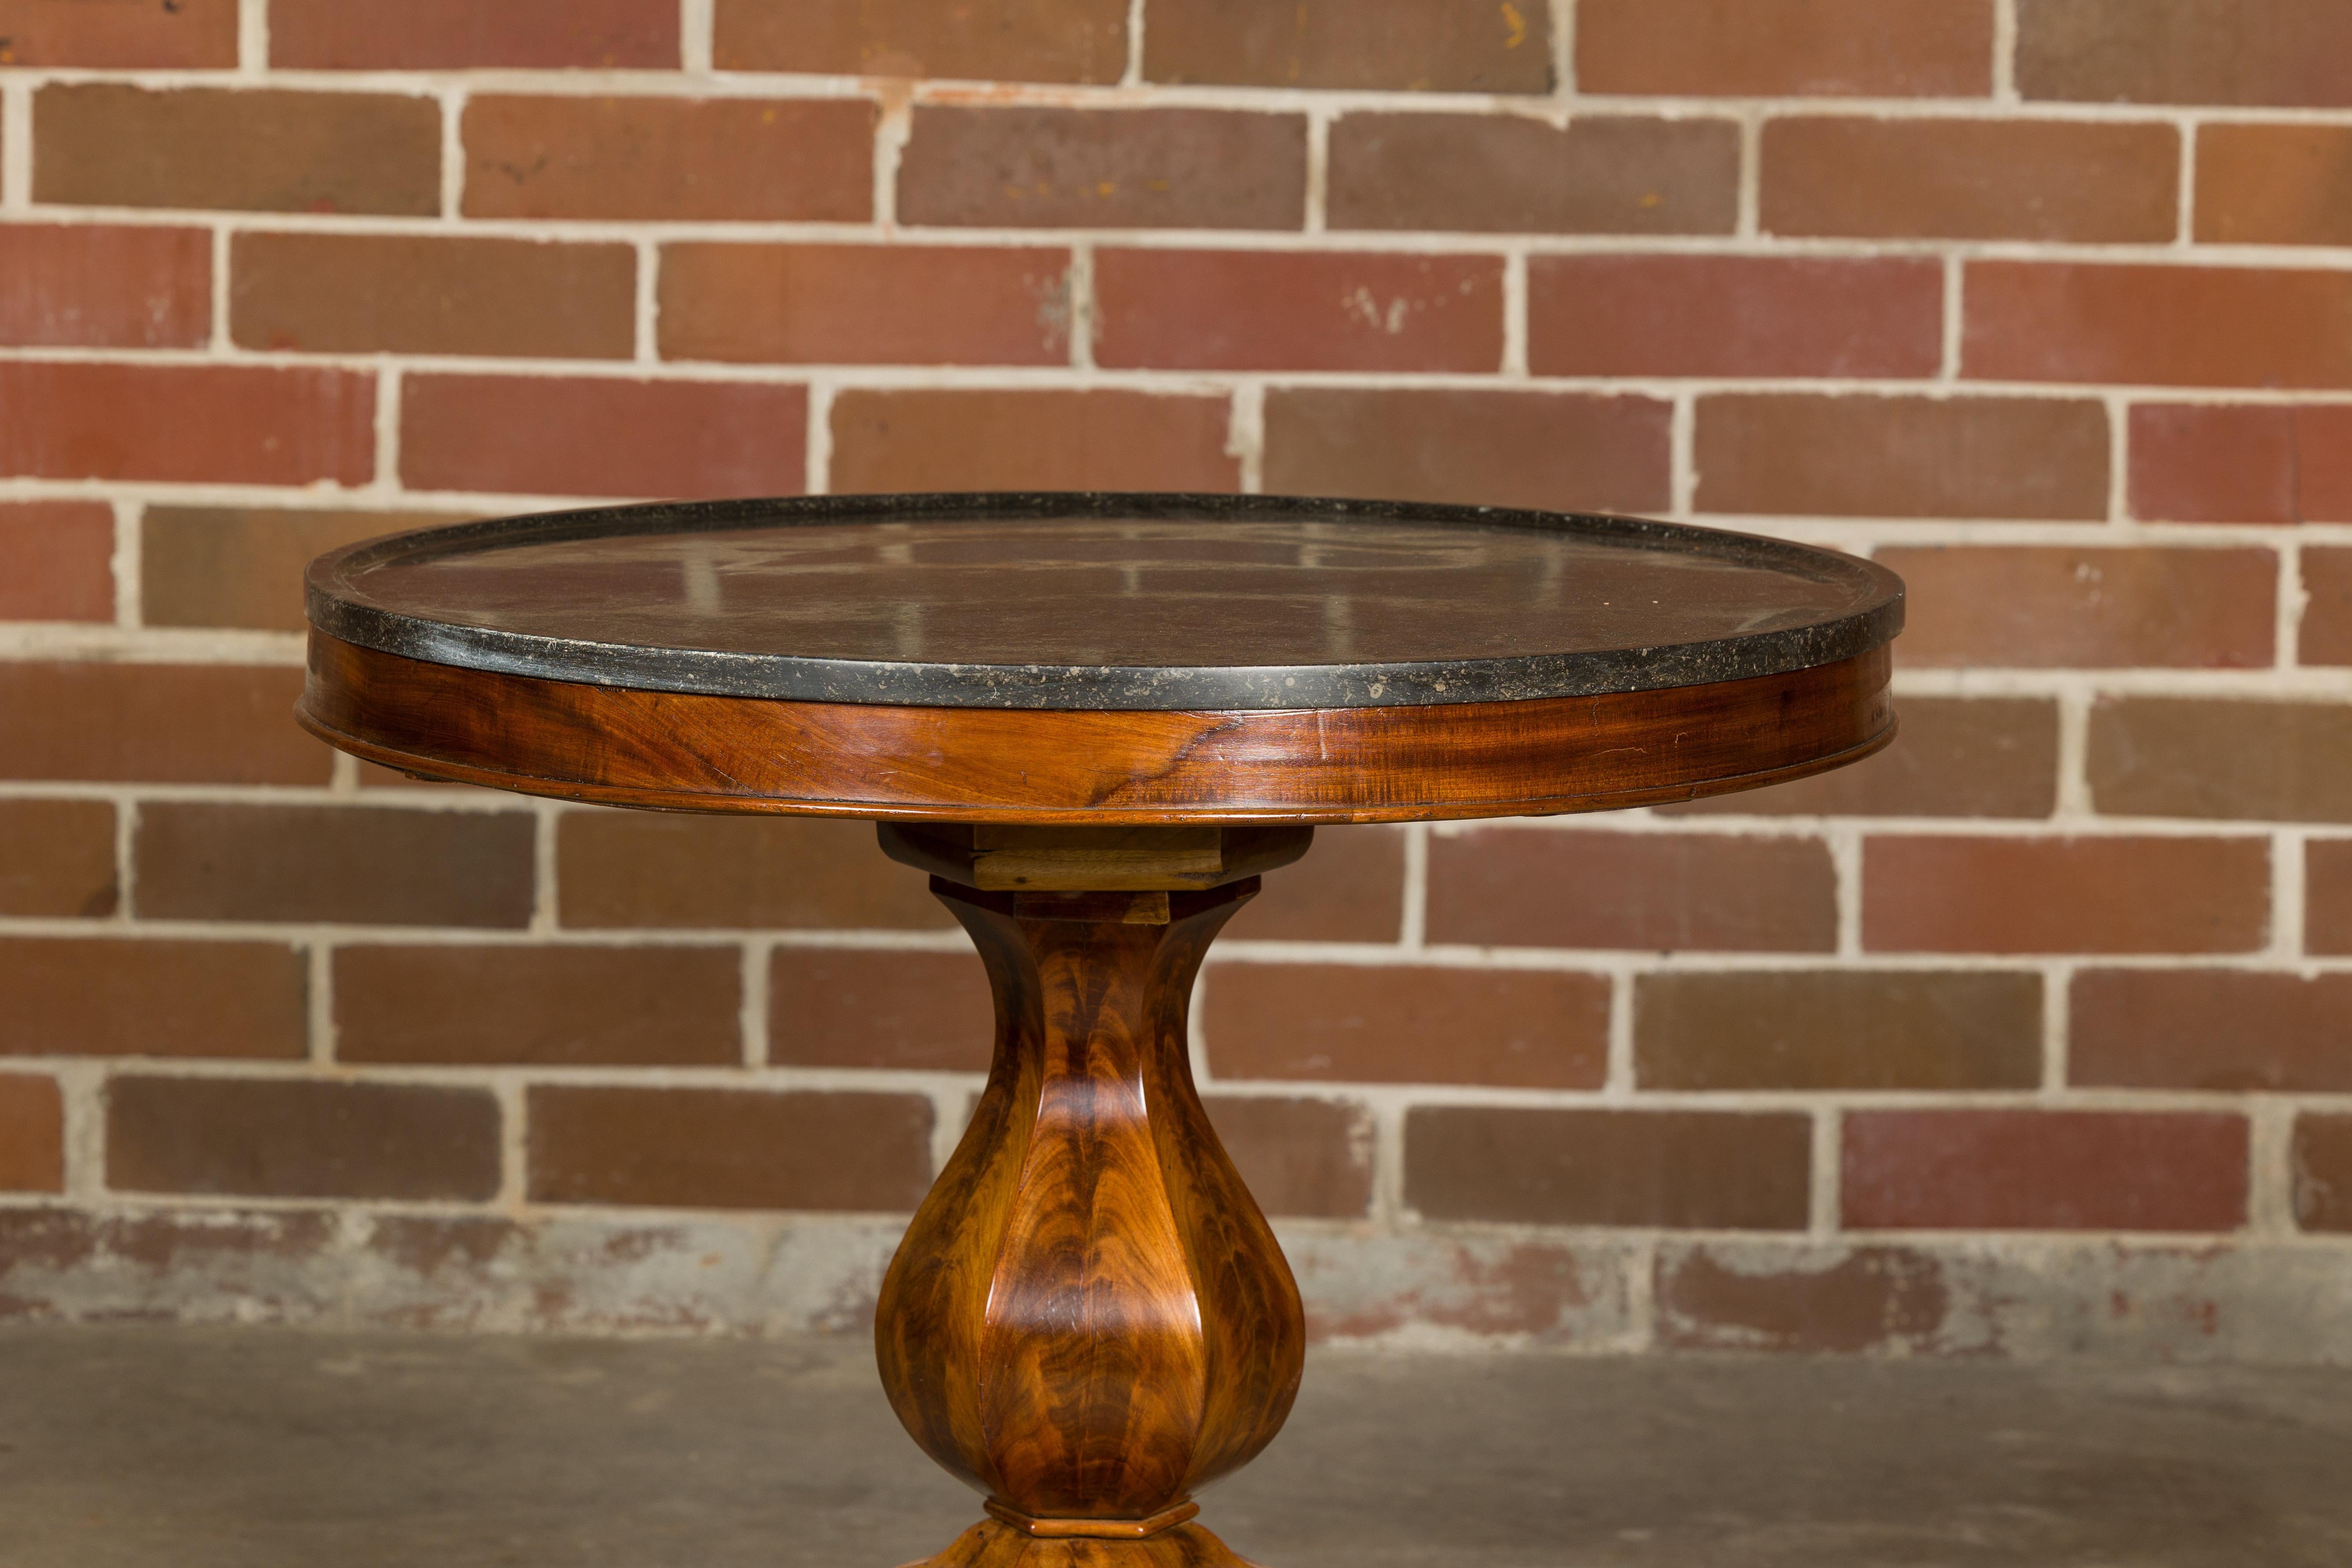 Carved Walnut 19th Century French Pedestal Table with Black Marble Top and Tripod Base